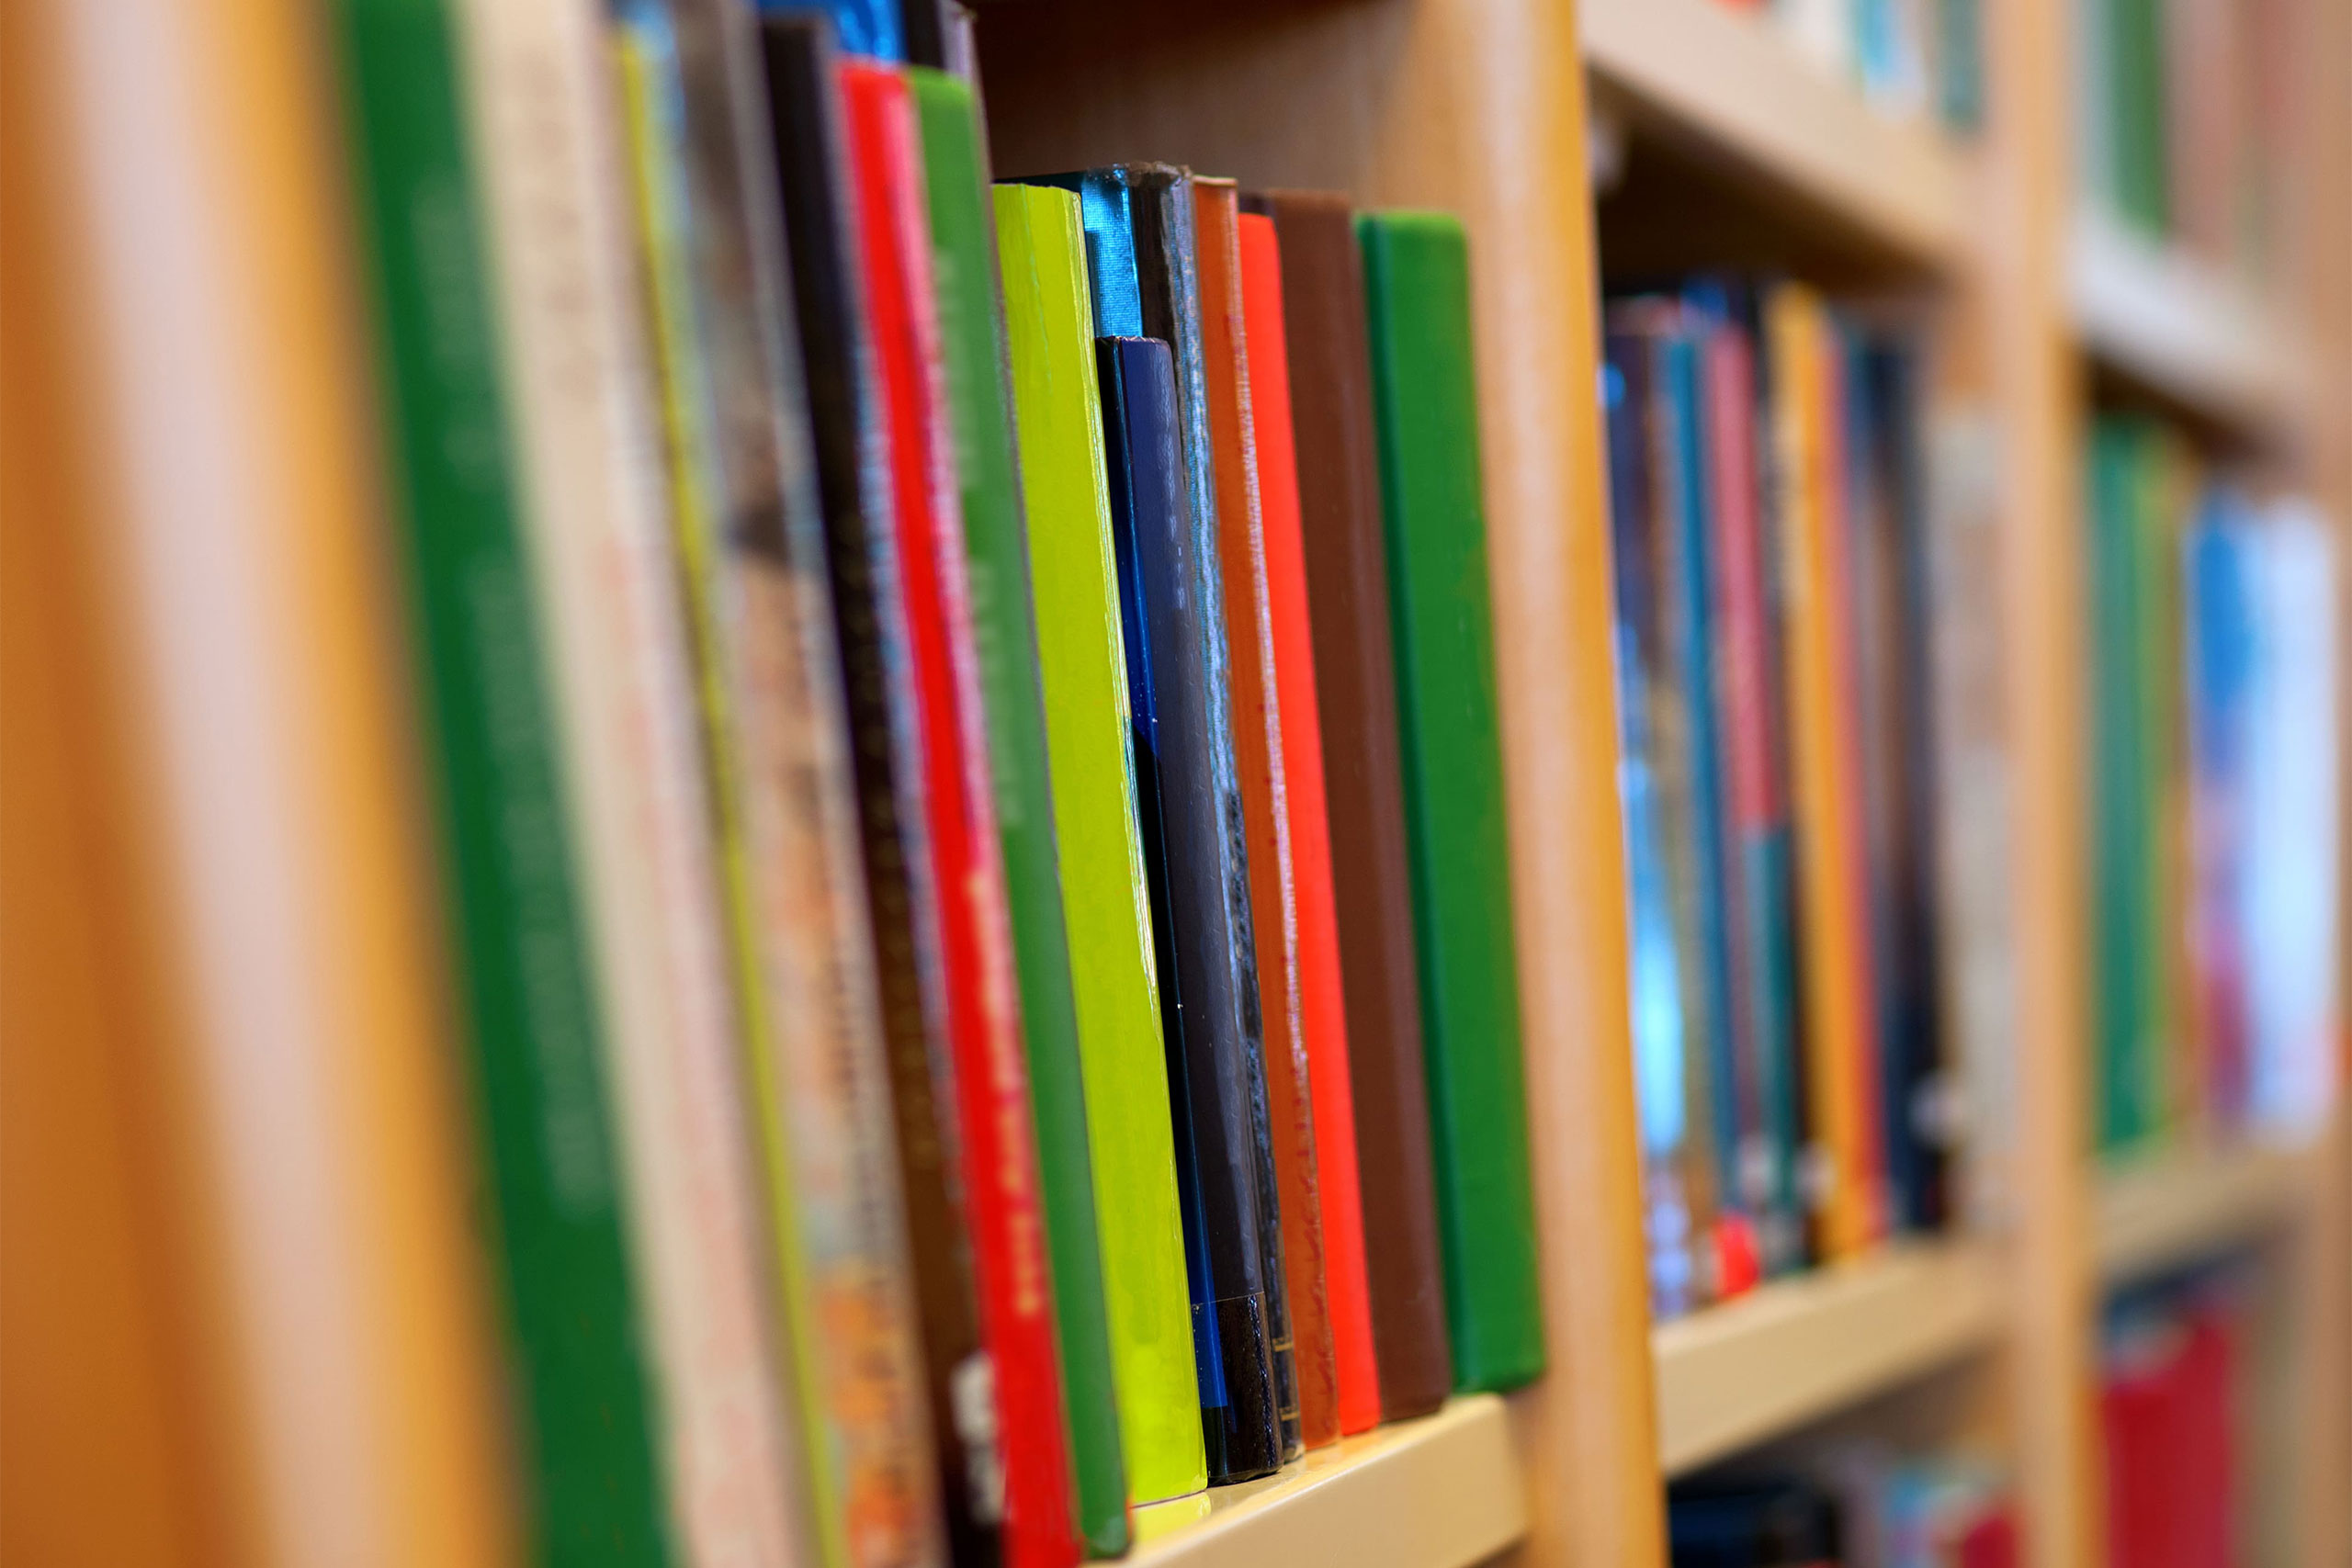 A close-up image of books on a bookcase.